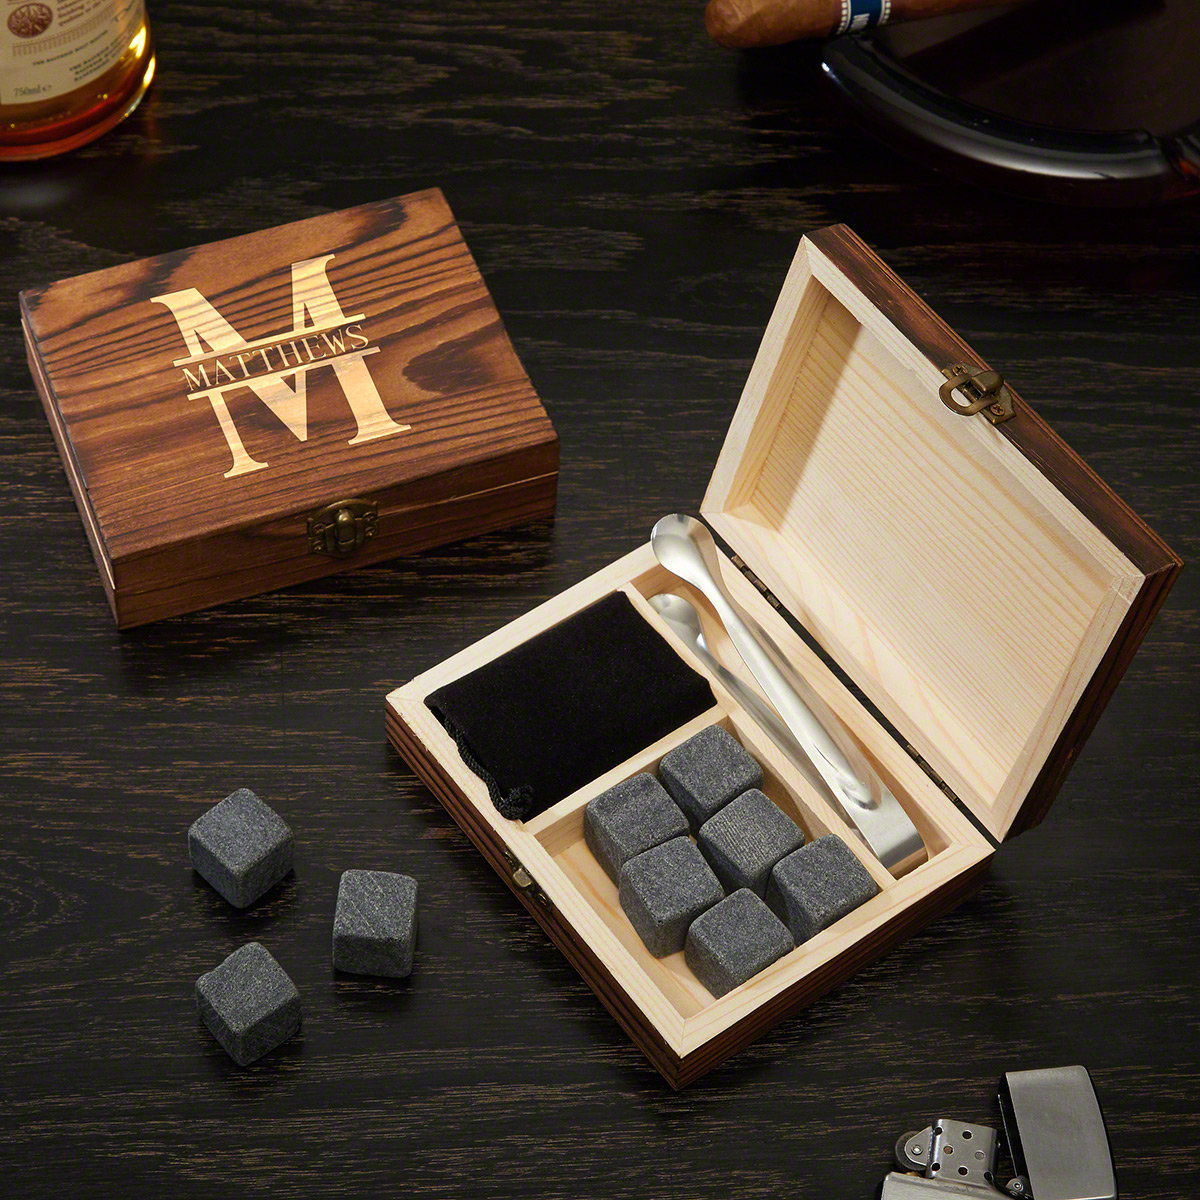 Personalized Whiskey Crate, Drinking Gifts